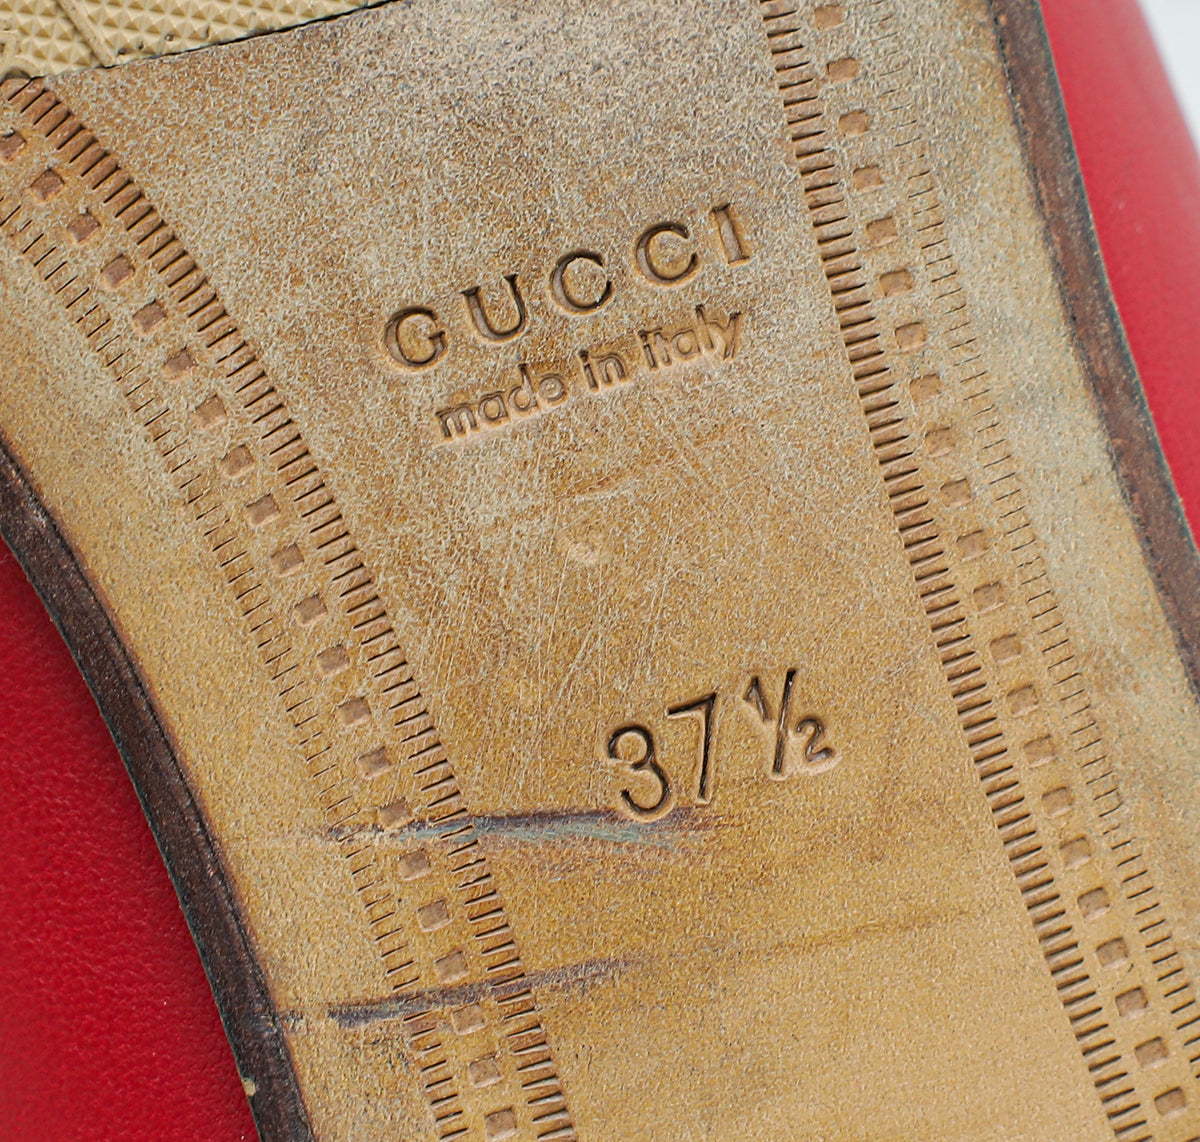 Gucci Red Horsebit Loafer 37.5